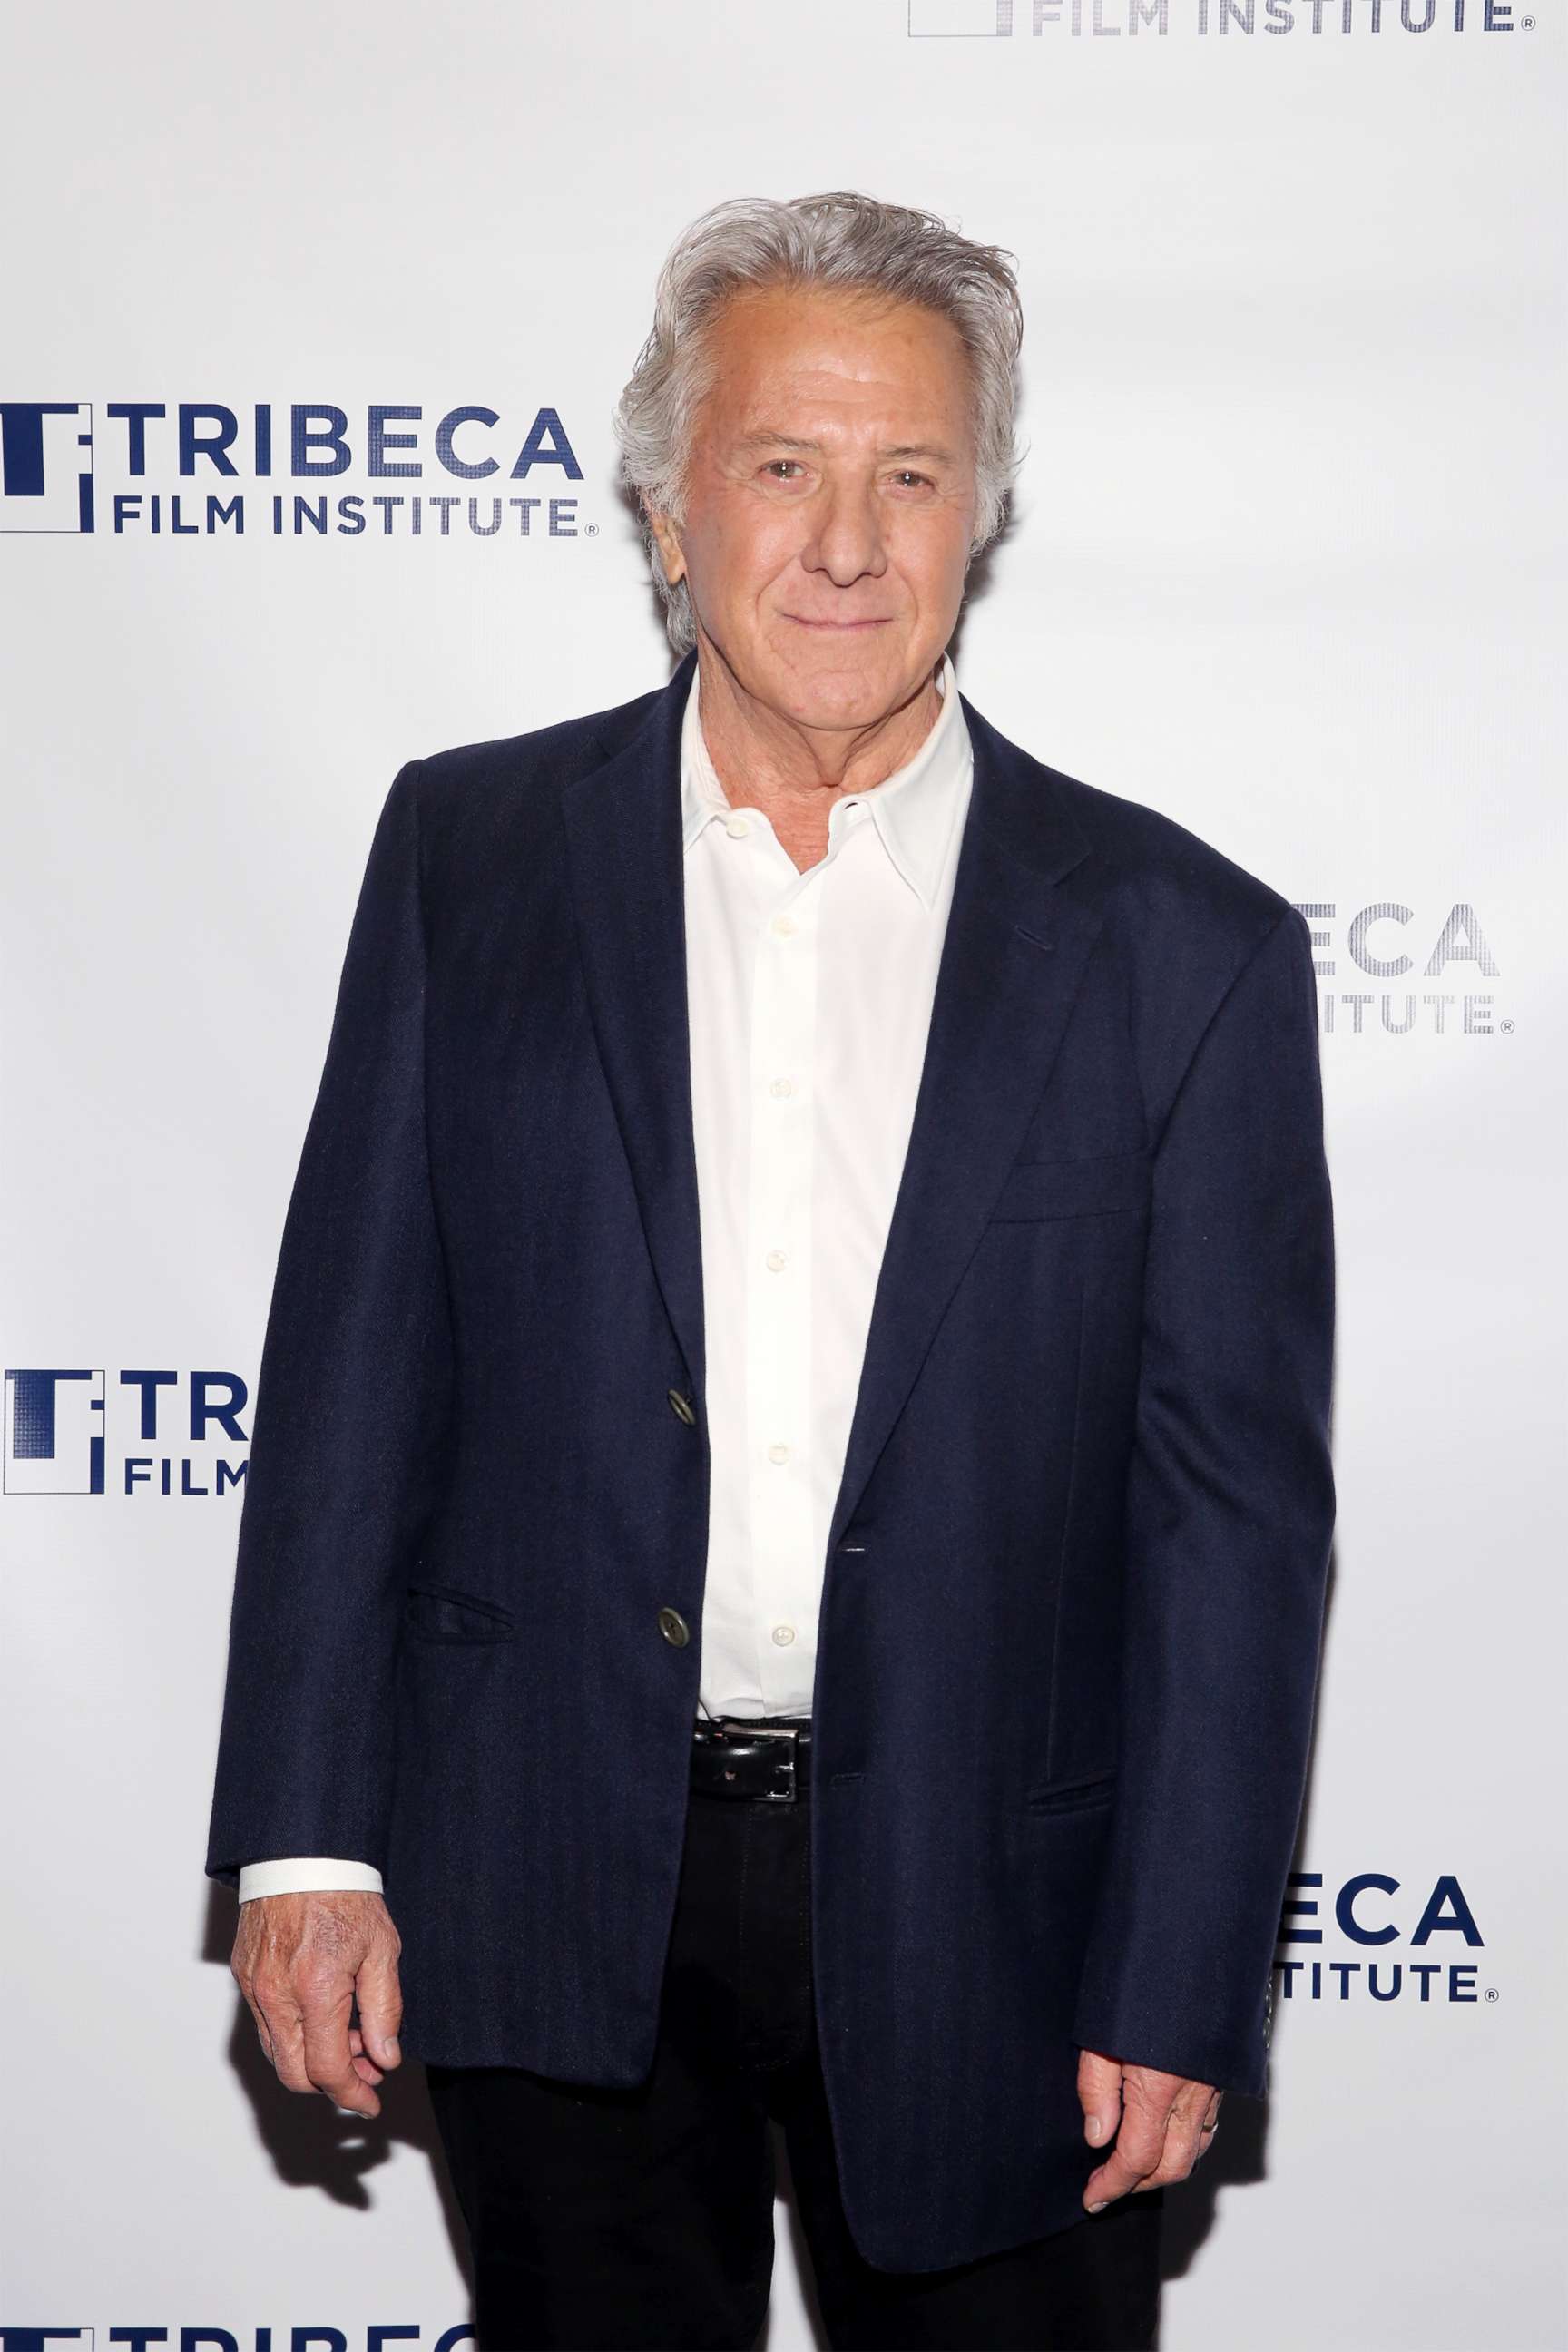 PHOTO: Dustin Hoffman attends the 20th Anniversary screening of "Wag The Dog" at 92nd Street Y, Dec. 4, 2017, in New York City.